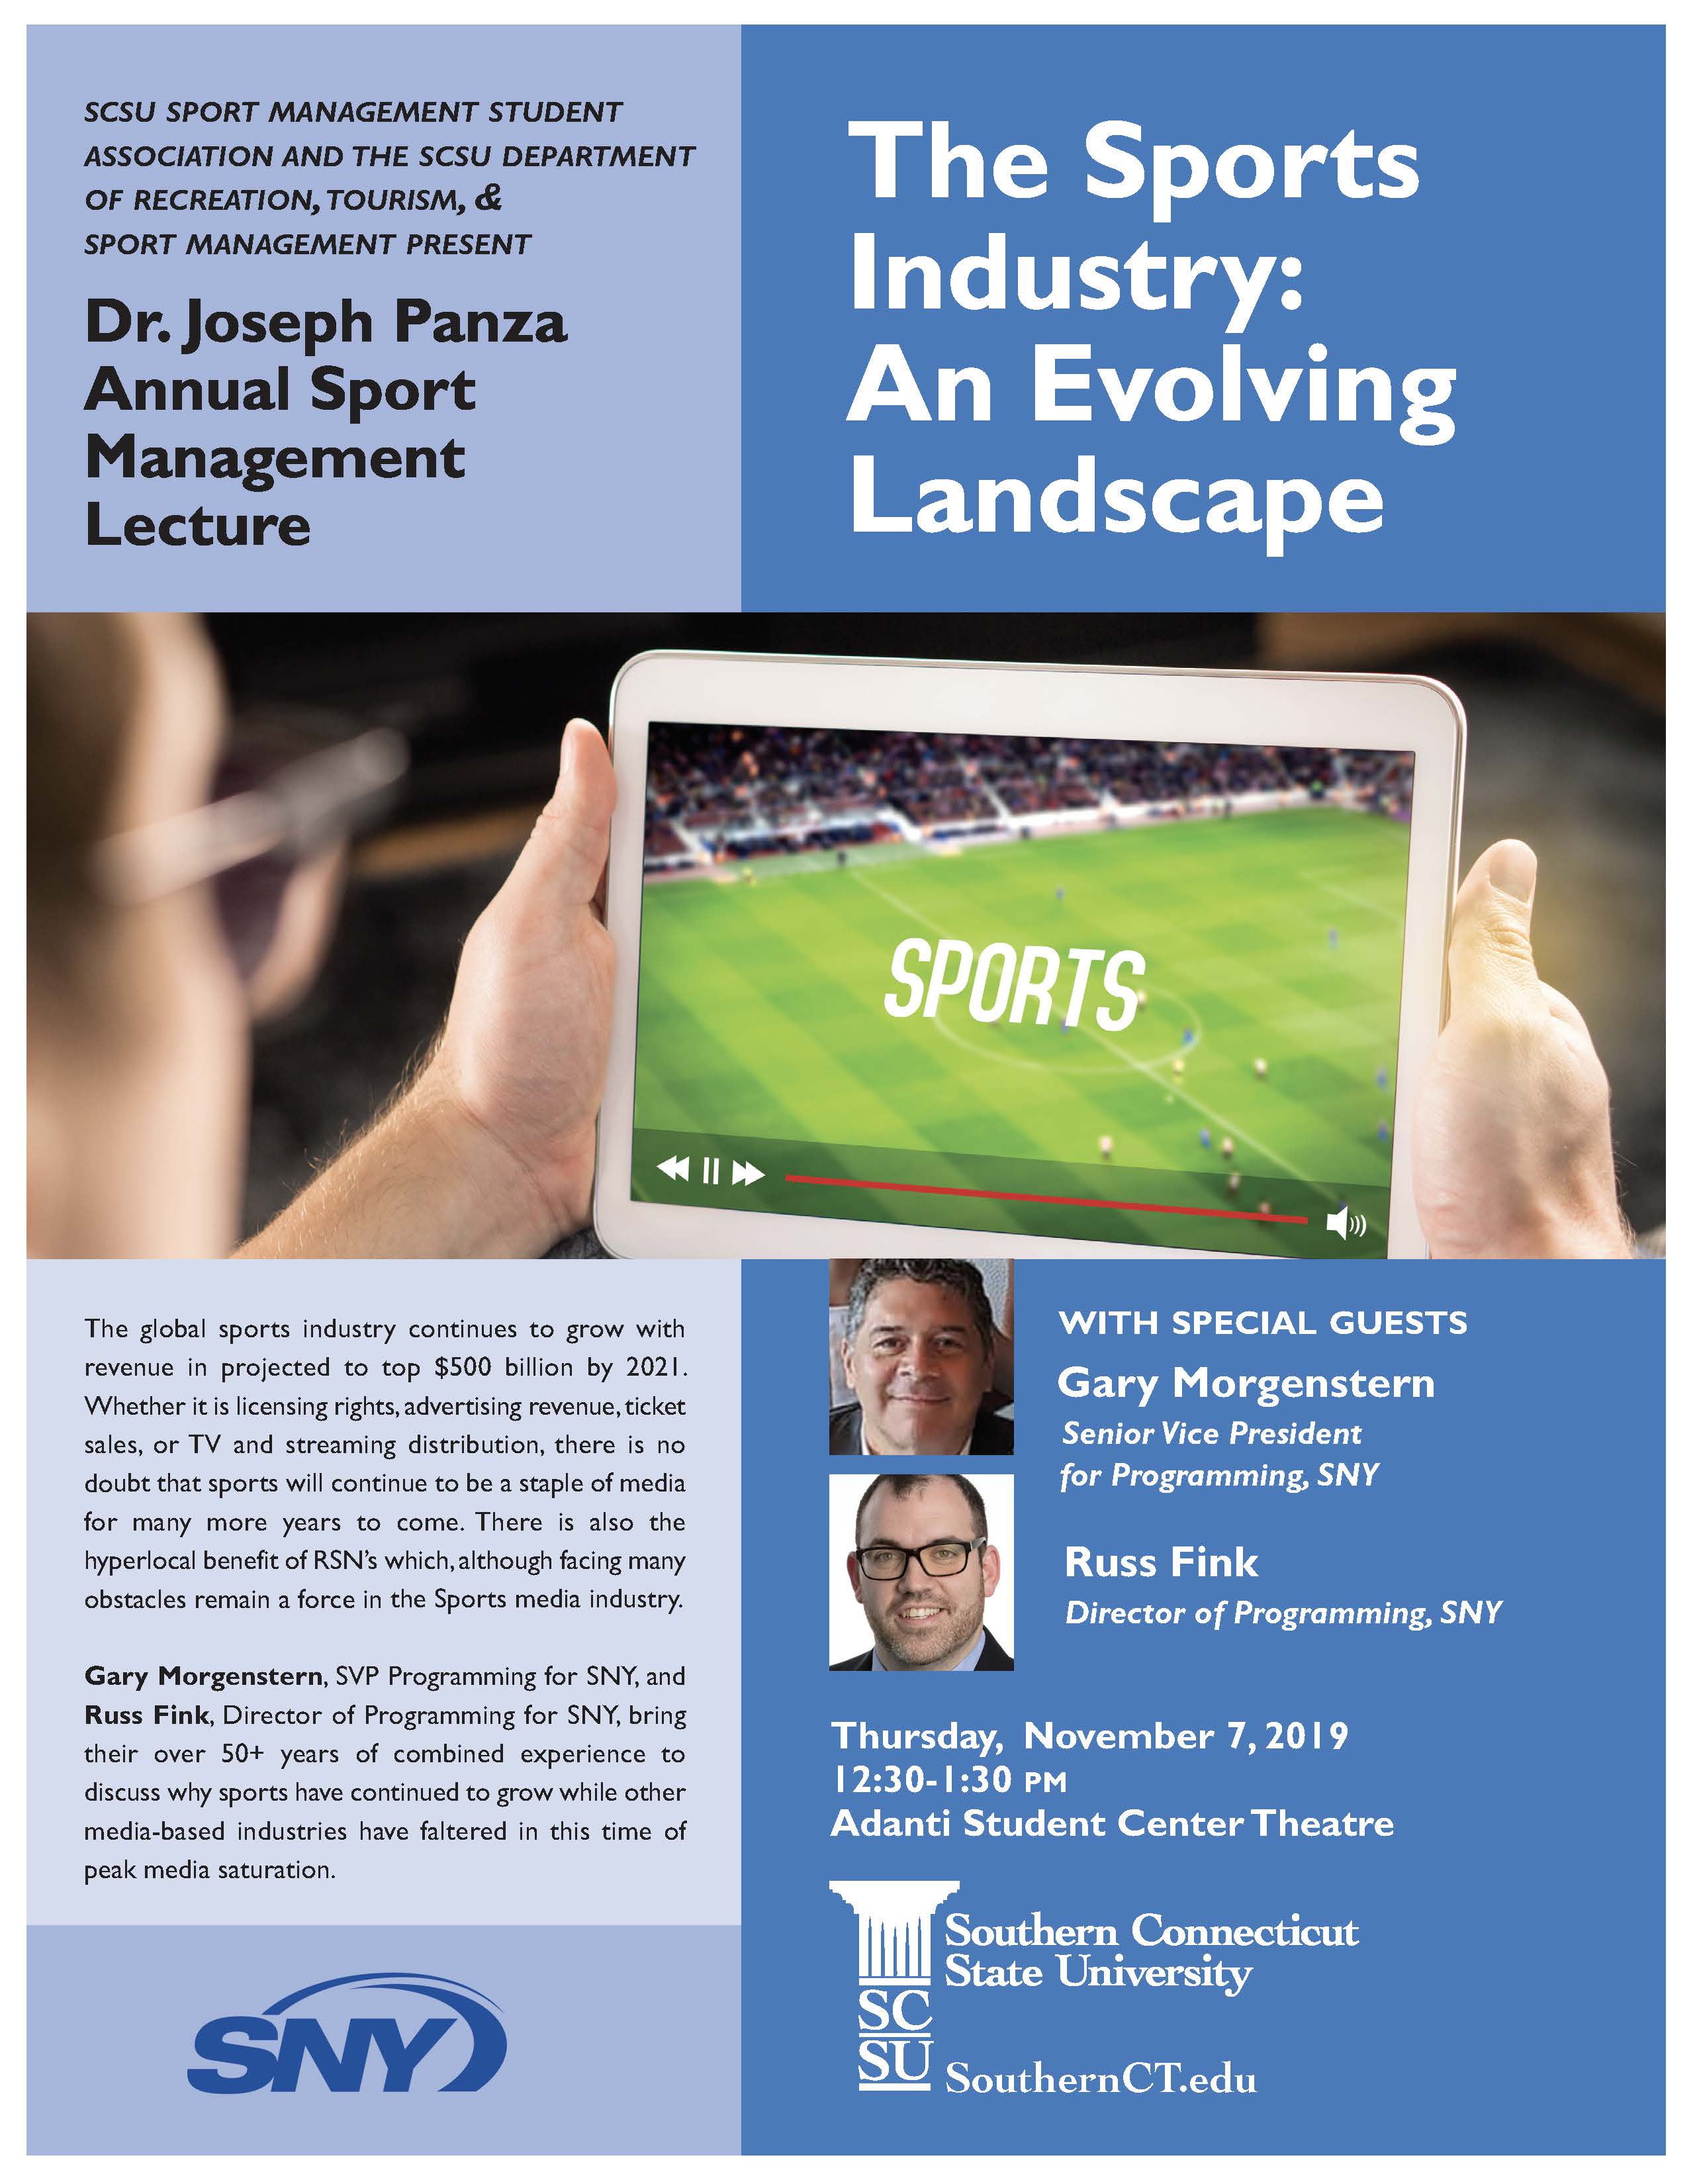 The 2019 Panza Sport Management Lecture Poster